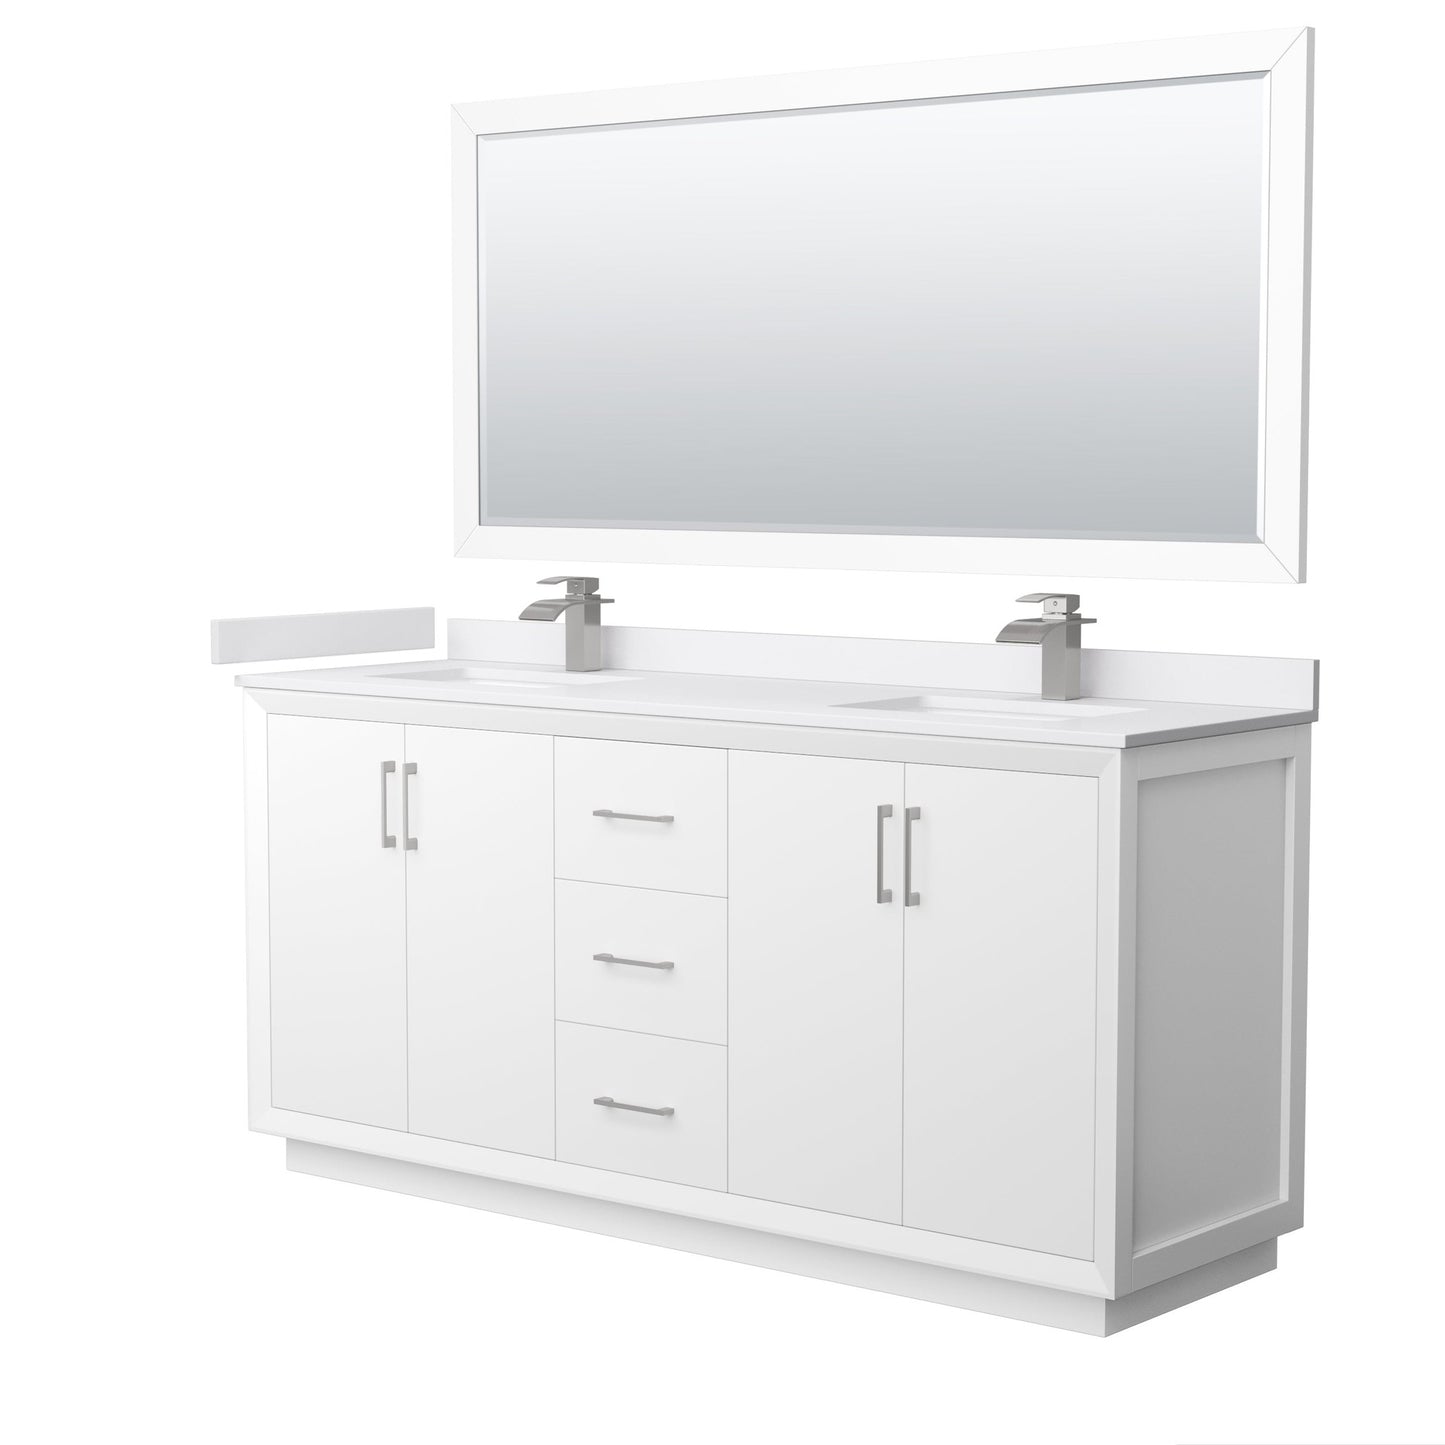 Wyndham Collection Strada 72" Double Bathroom Vanity in White, White Cultured Marble Countertop, Undermount Square Sink, Brushed Nickel Trim, 70" Mirror